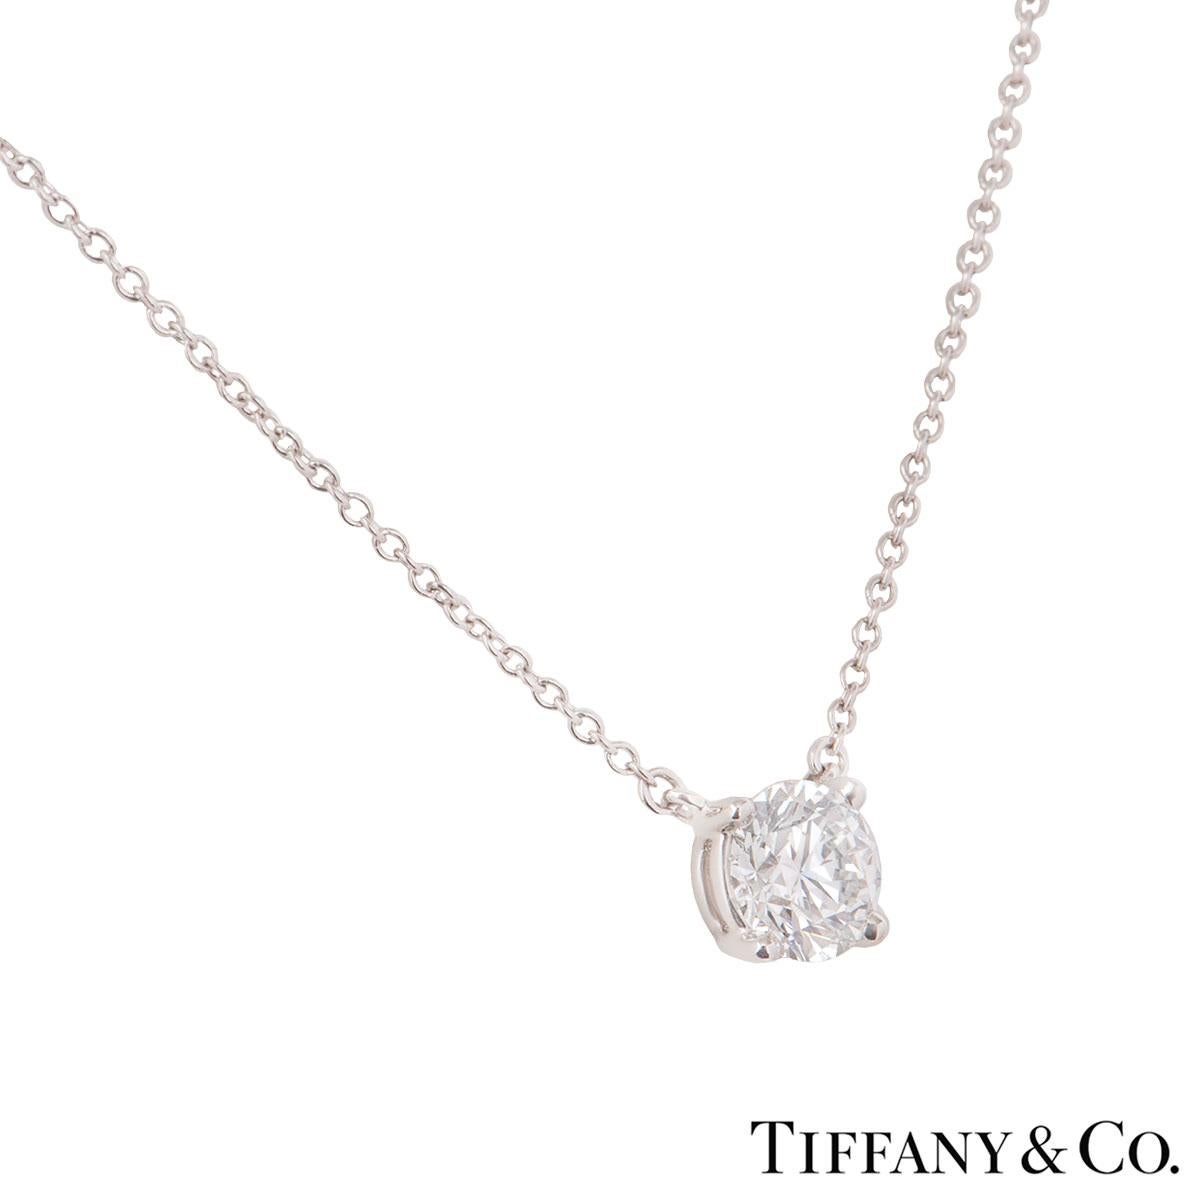 A lovely Tiffany & Co. platinum diamond pendant. The pendant features a single round brilliant cut diamond in a 4 claw setting with a weight of 0.94ct, E colour and VVS2 clarity. The pendant features a 15.80 inch cable chain with a spring clasp and